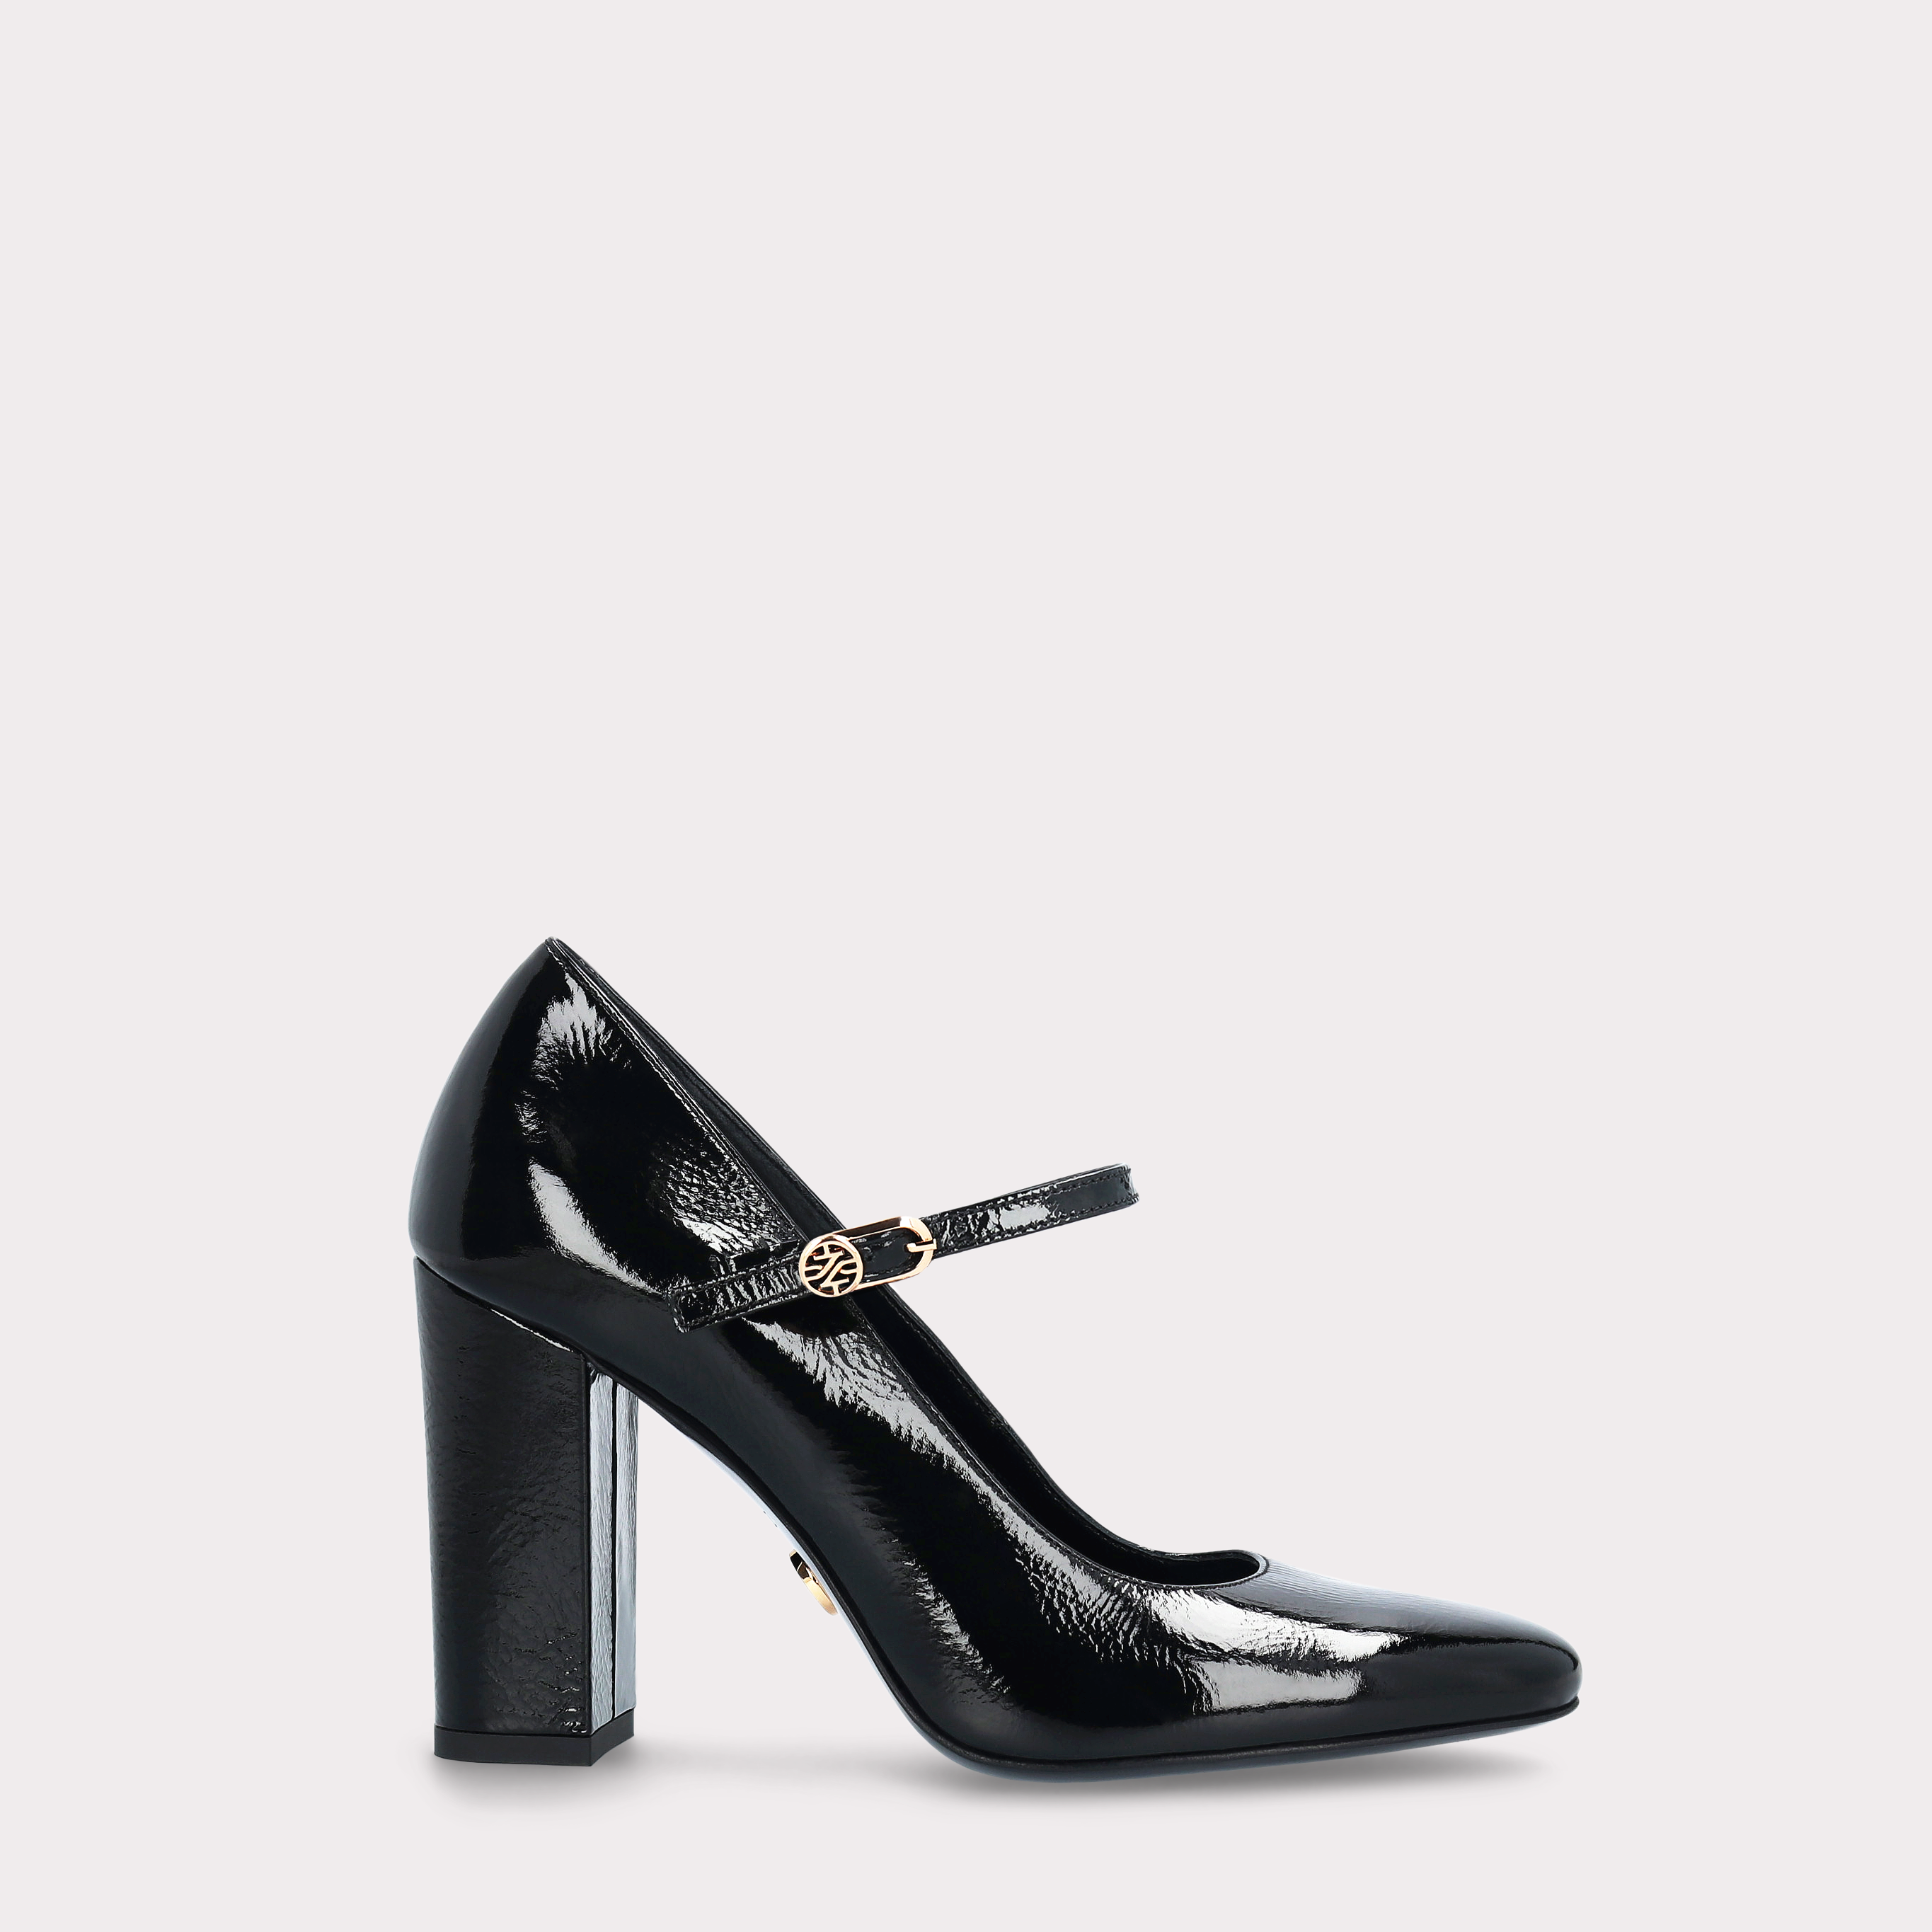 DELMA BEBE 02 BLACK CRUSHED PATENT LEATHER PUMPS